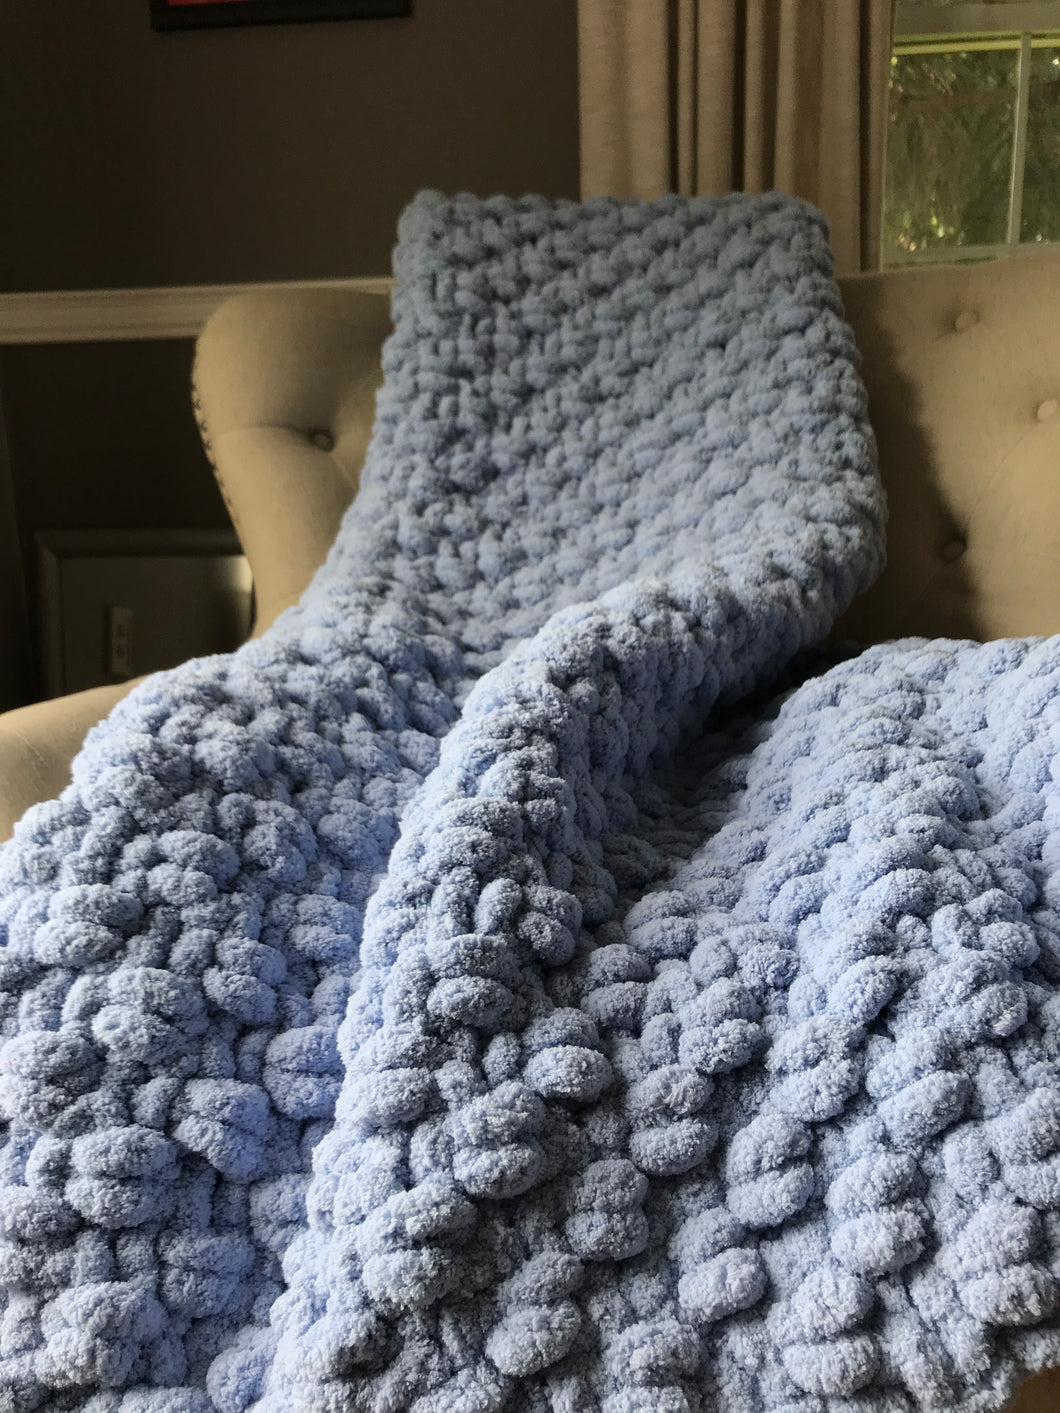 Periwinkle Blanket | Chunky Knit Blanket - Hands On For Homemade